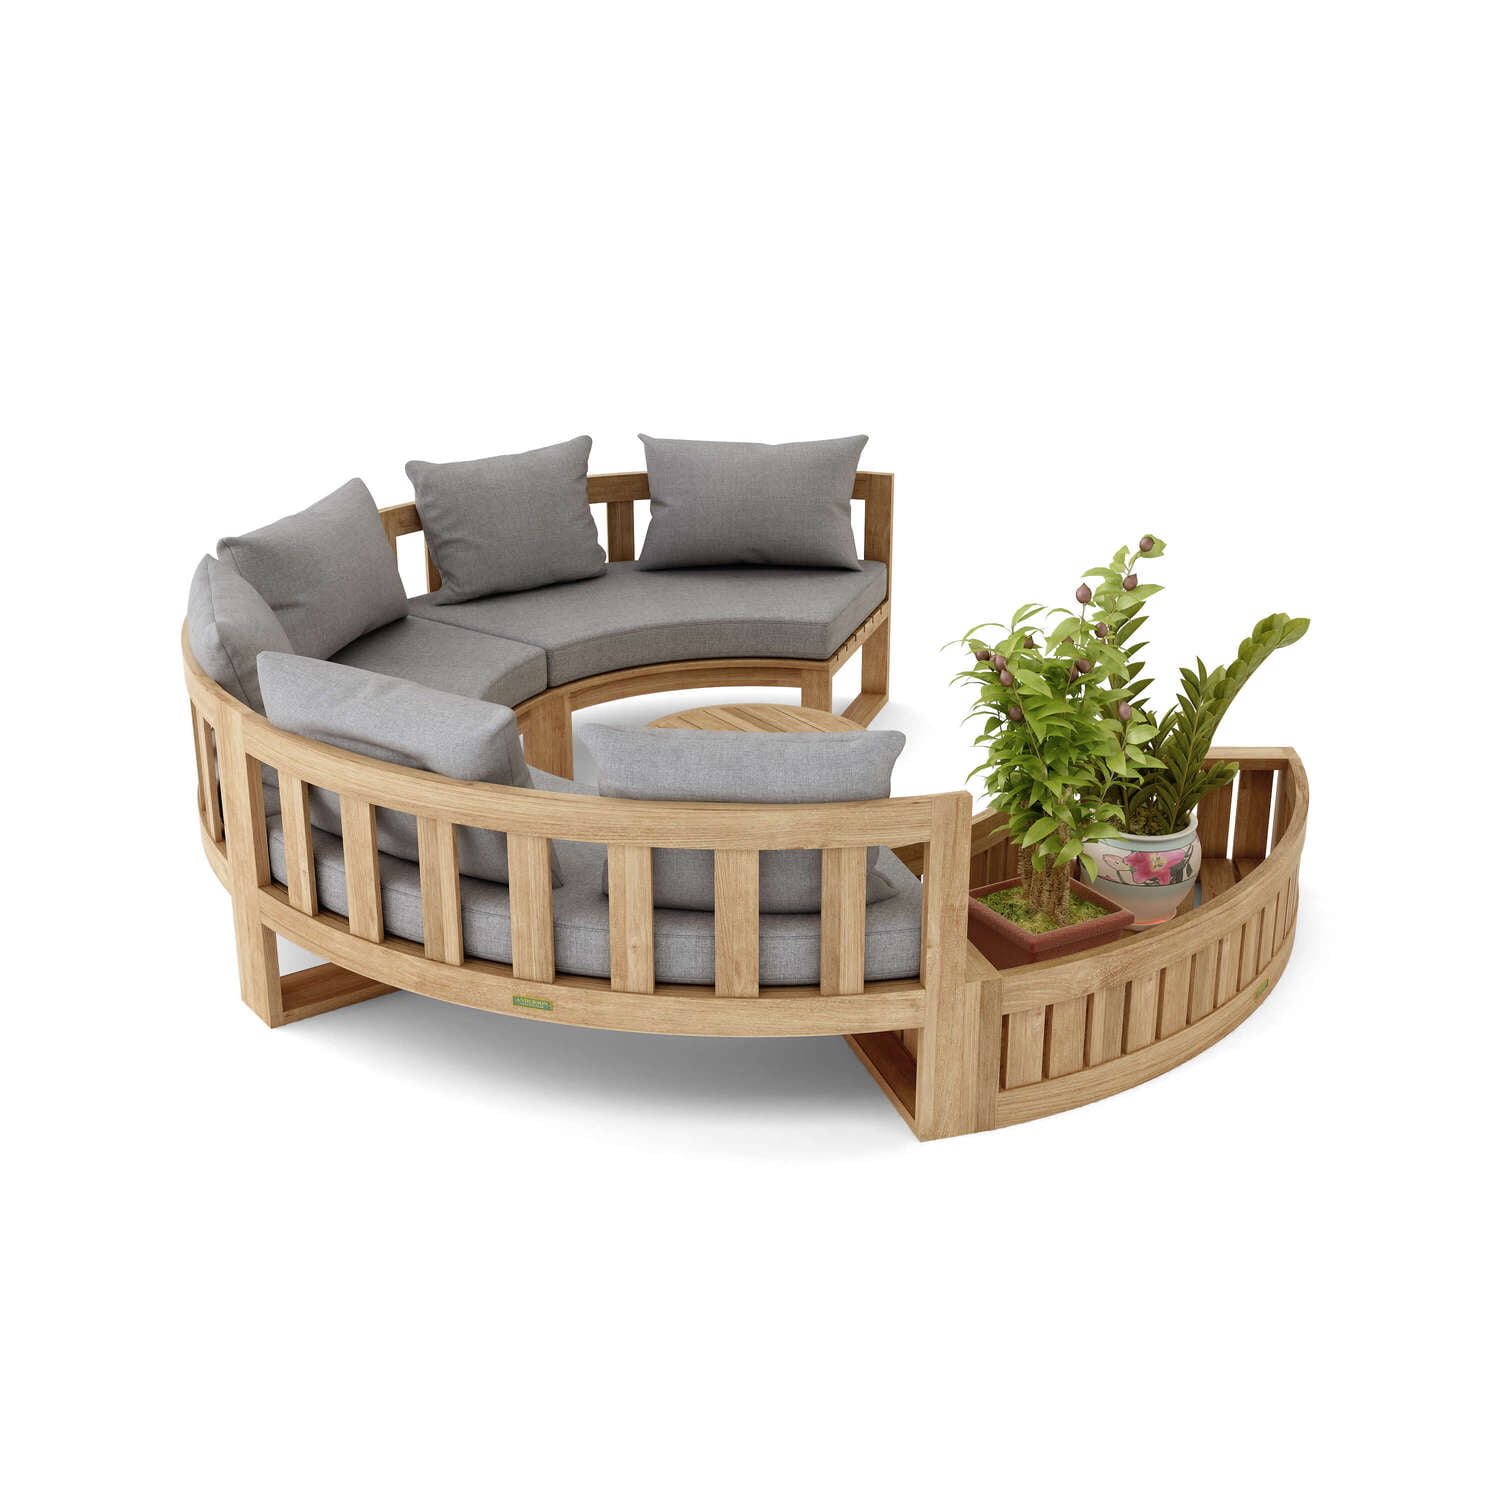 Picture of Anderson Teak SET-808 Circular Modular Deep Seating Set, Natural Smooth Well Sanded